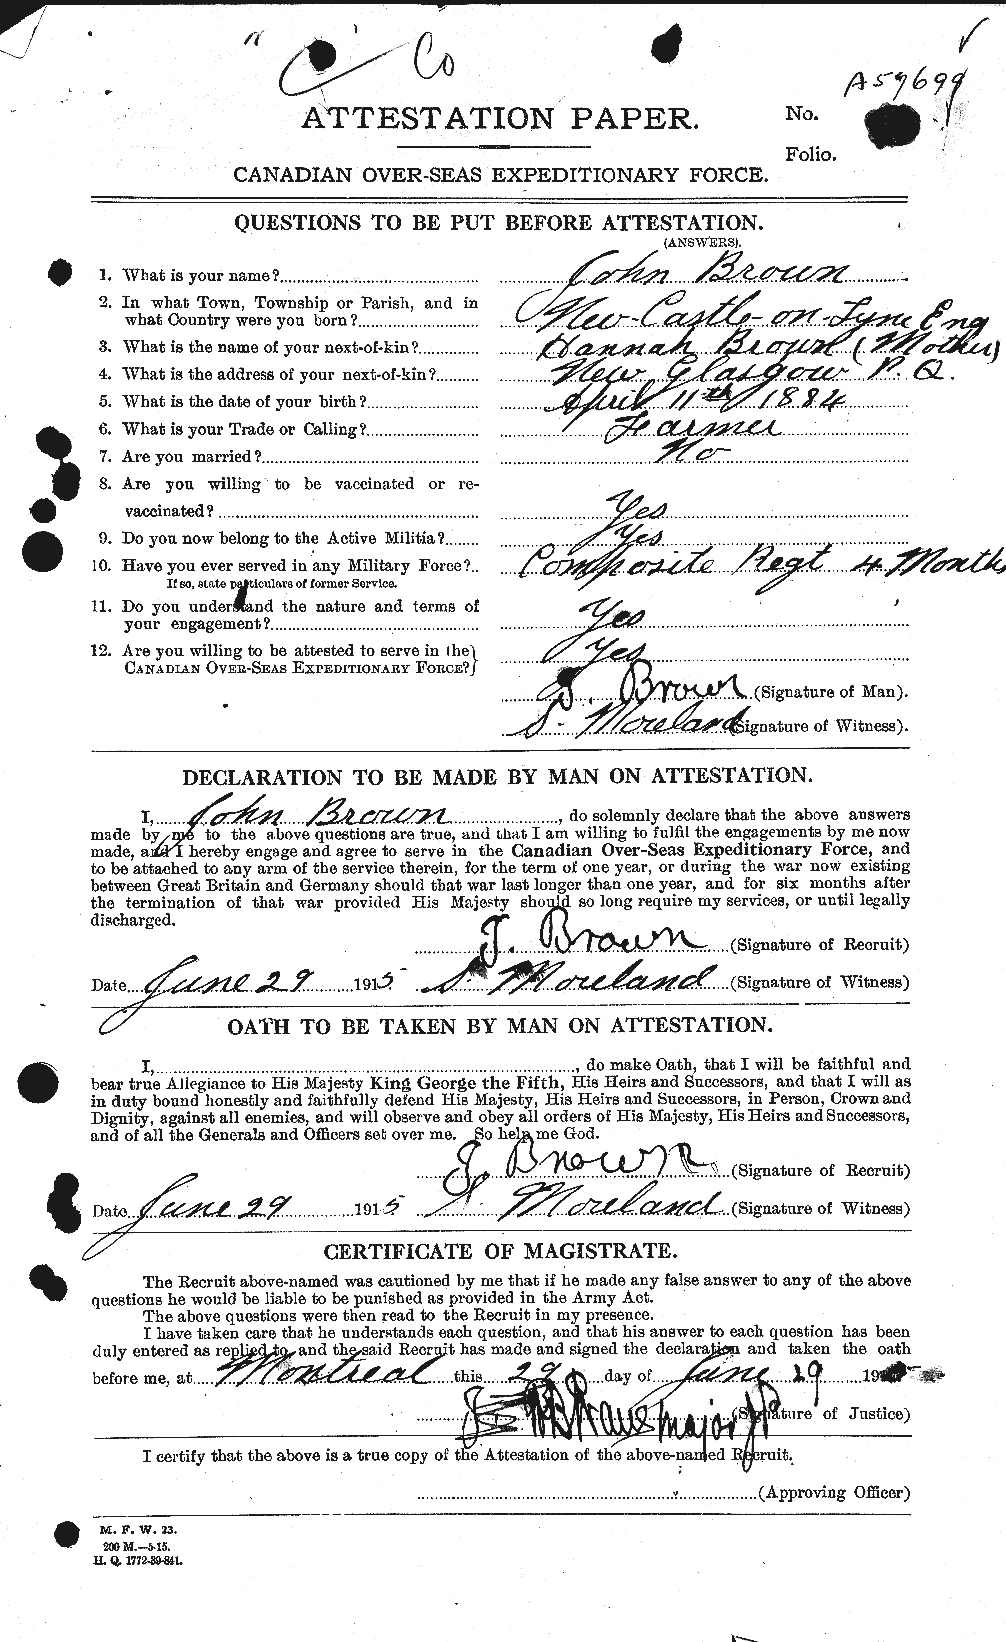 Personnel Records of the First World War - CEF 263886a